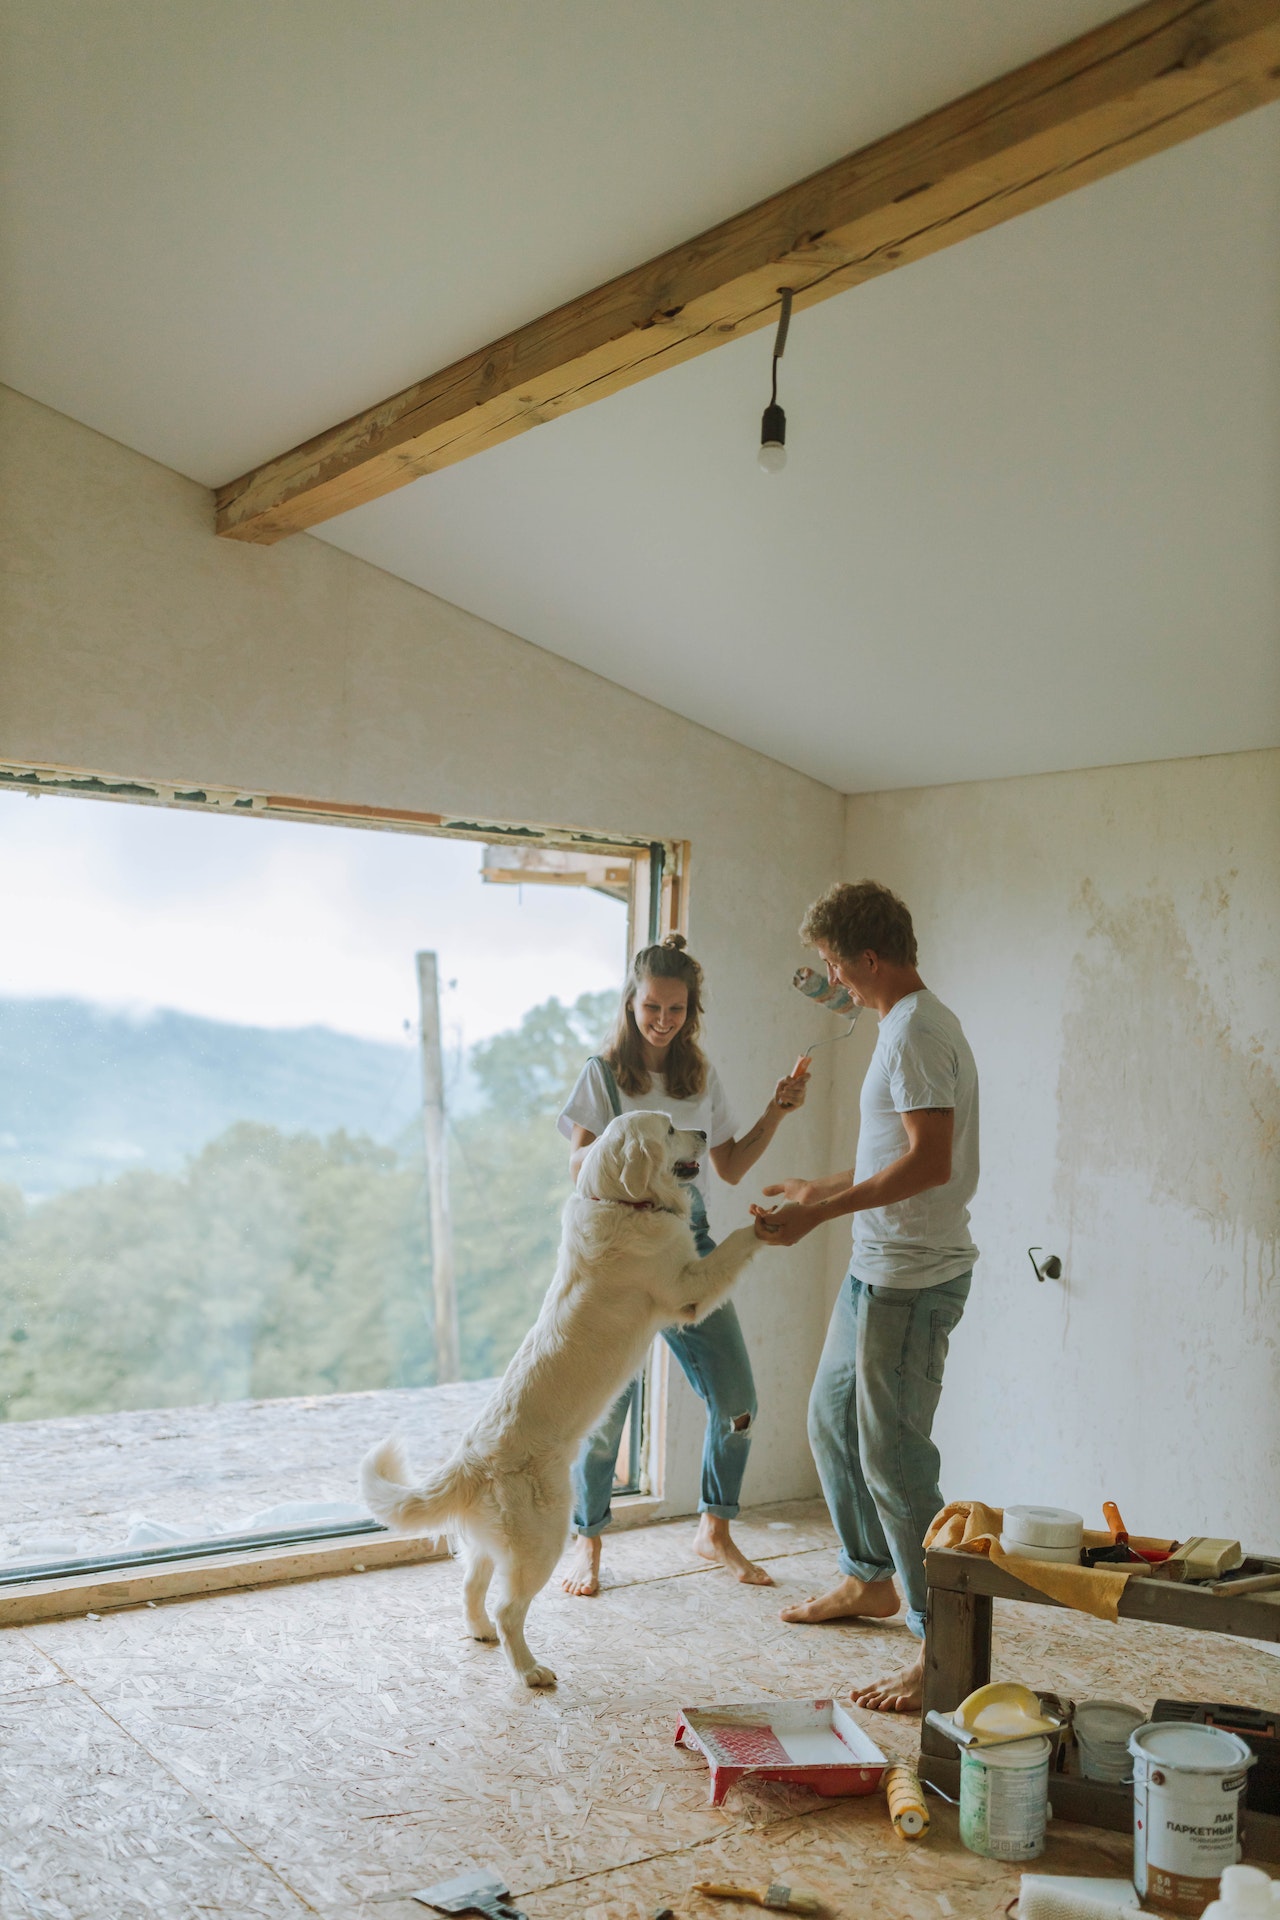 Man and woman playing with their dog while doing a renovation